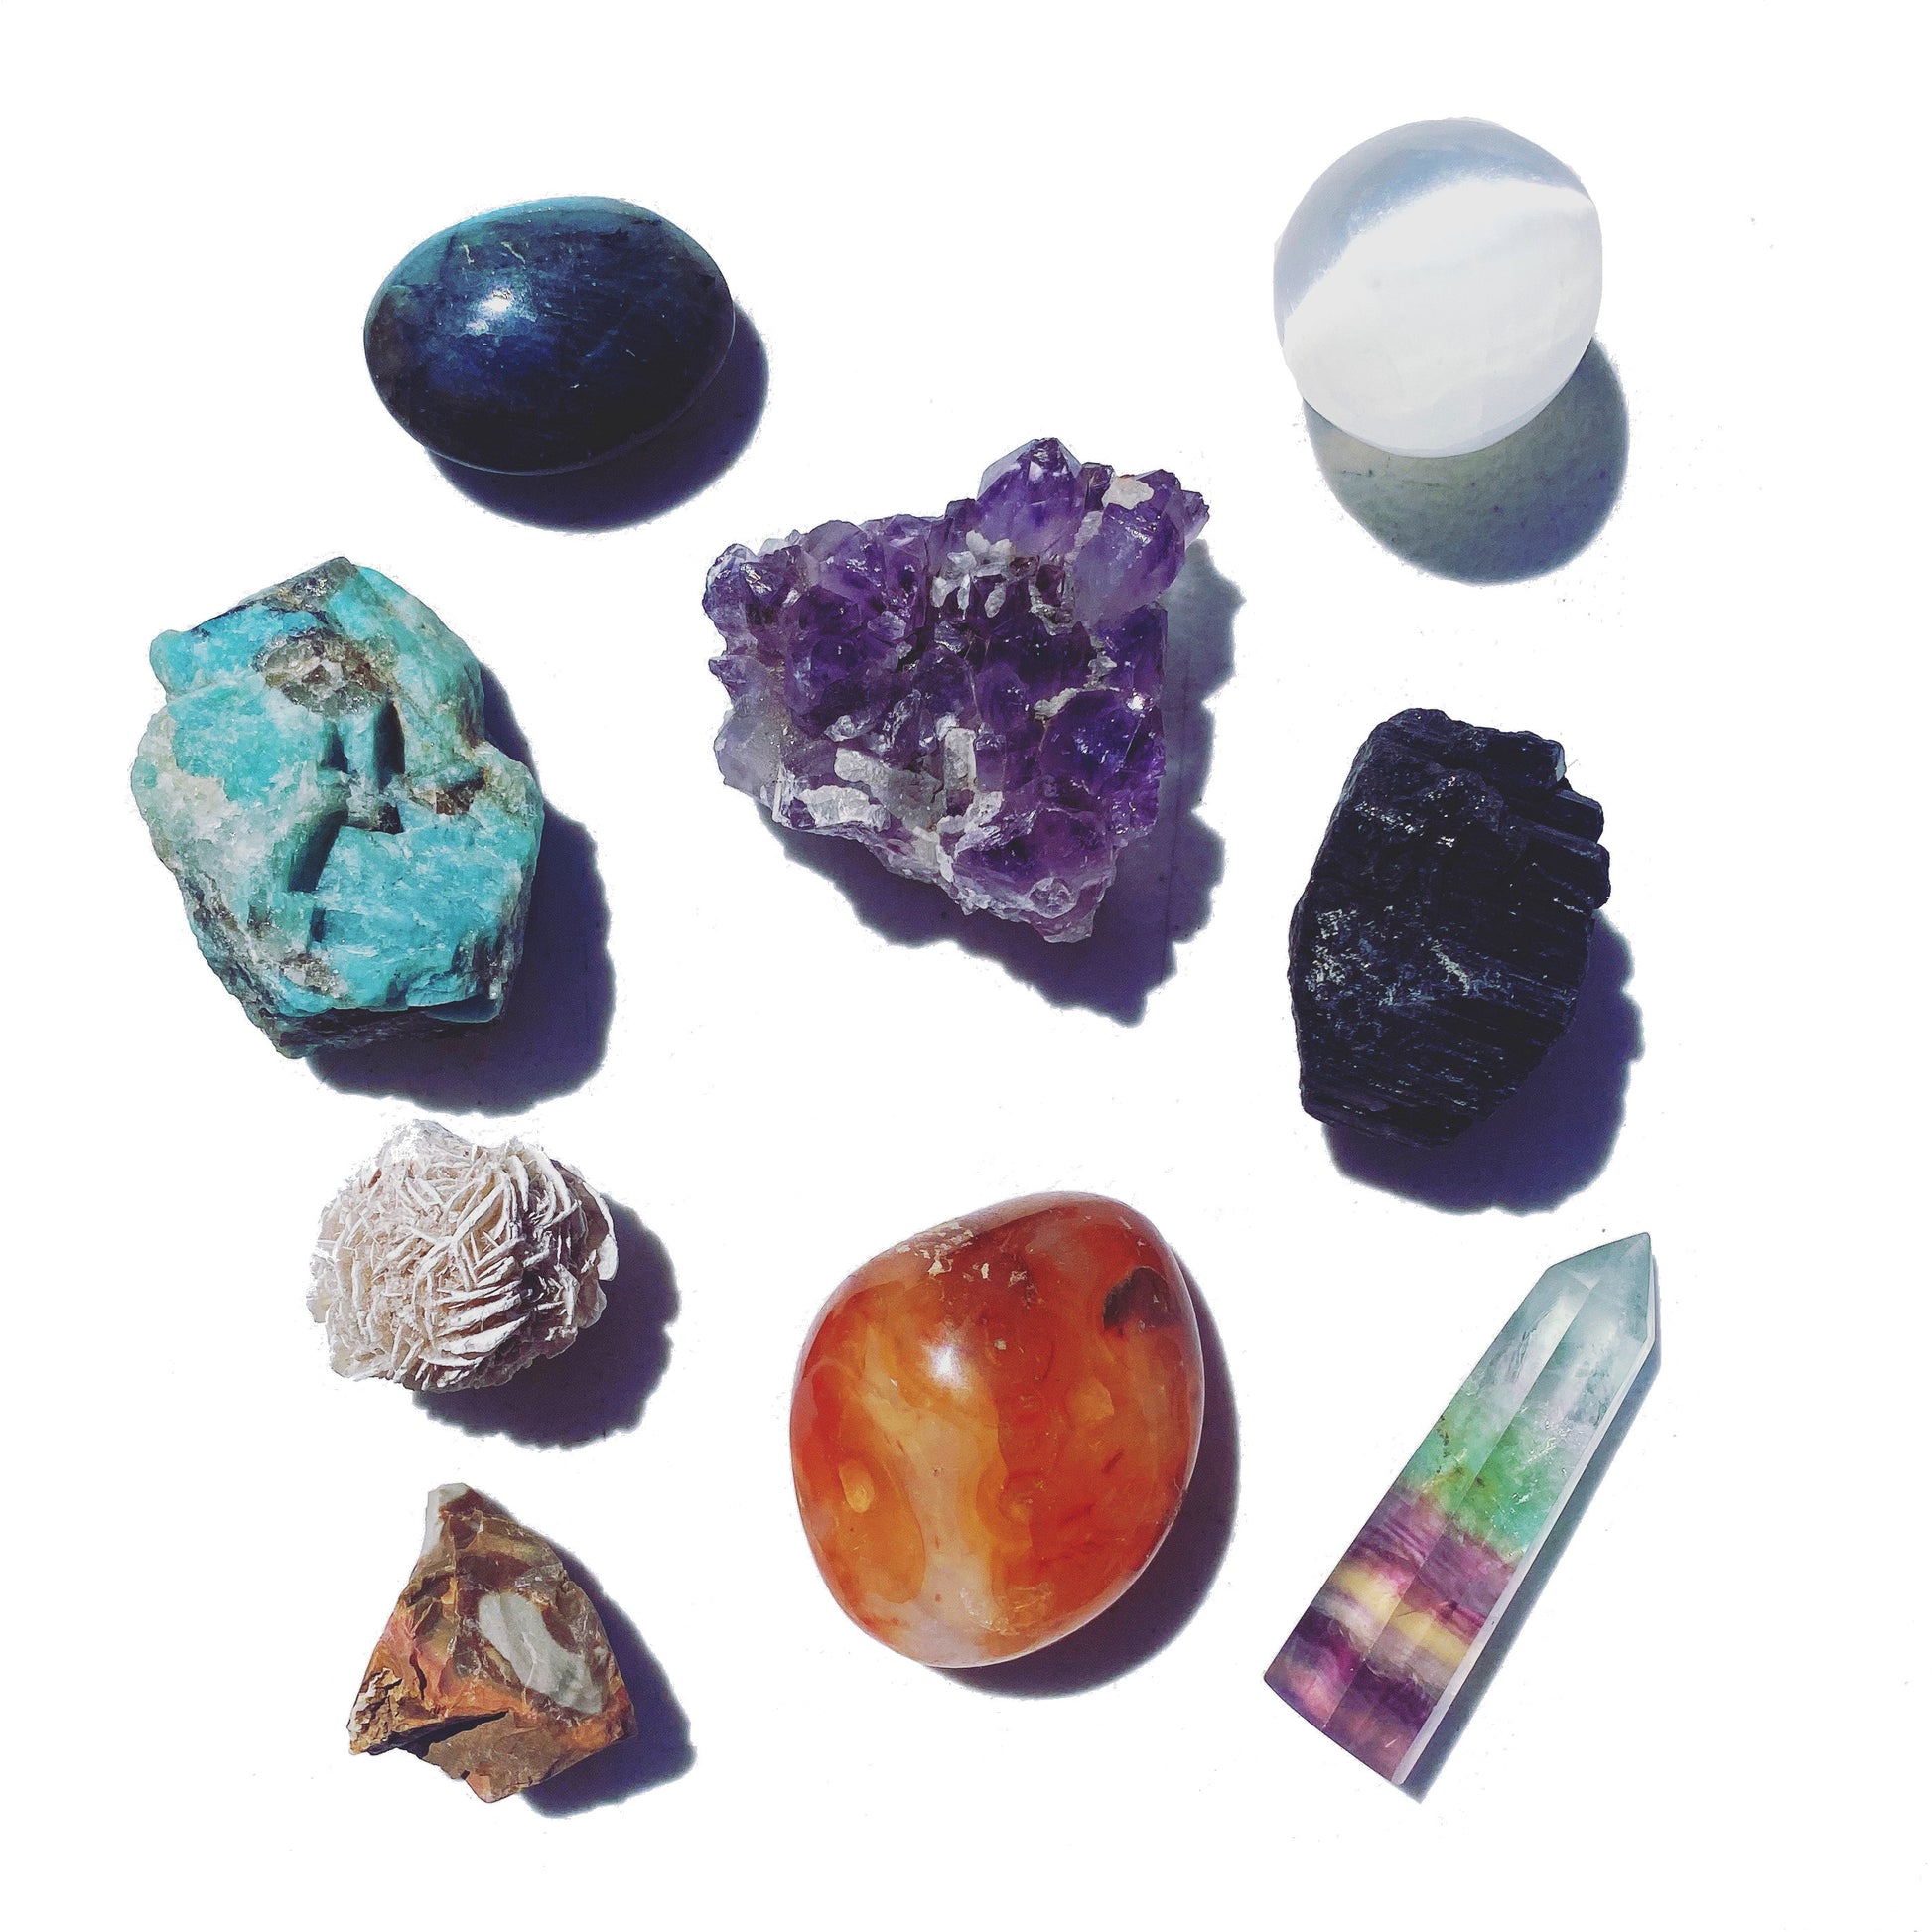 Crystal Witchcraft Kit ~ Natural Crystal Collection ~ Rough Crystal Healing Crystals and Stones Geode Amethyst selenite fluorite obsidian